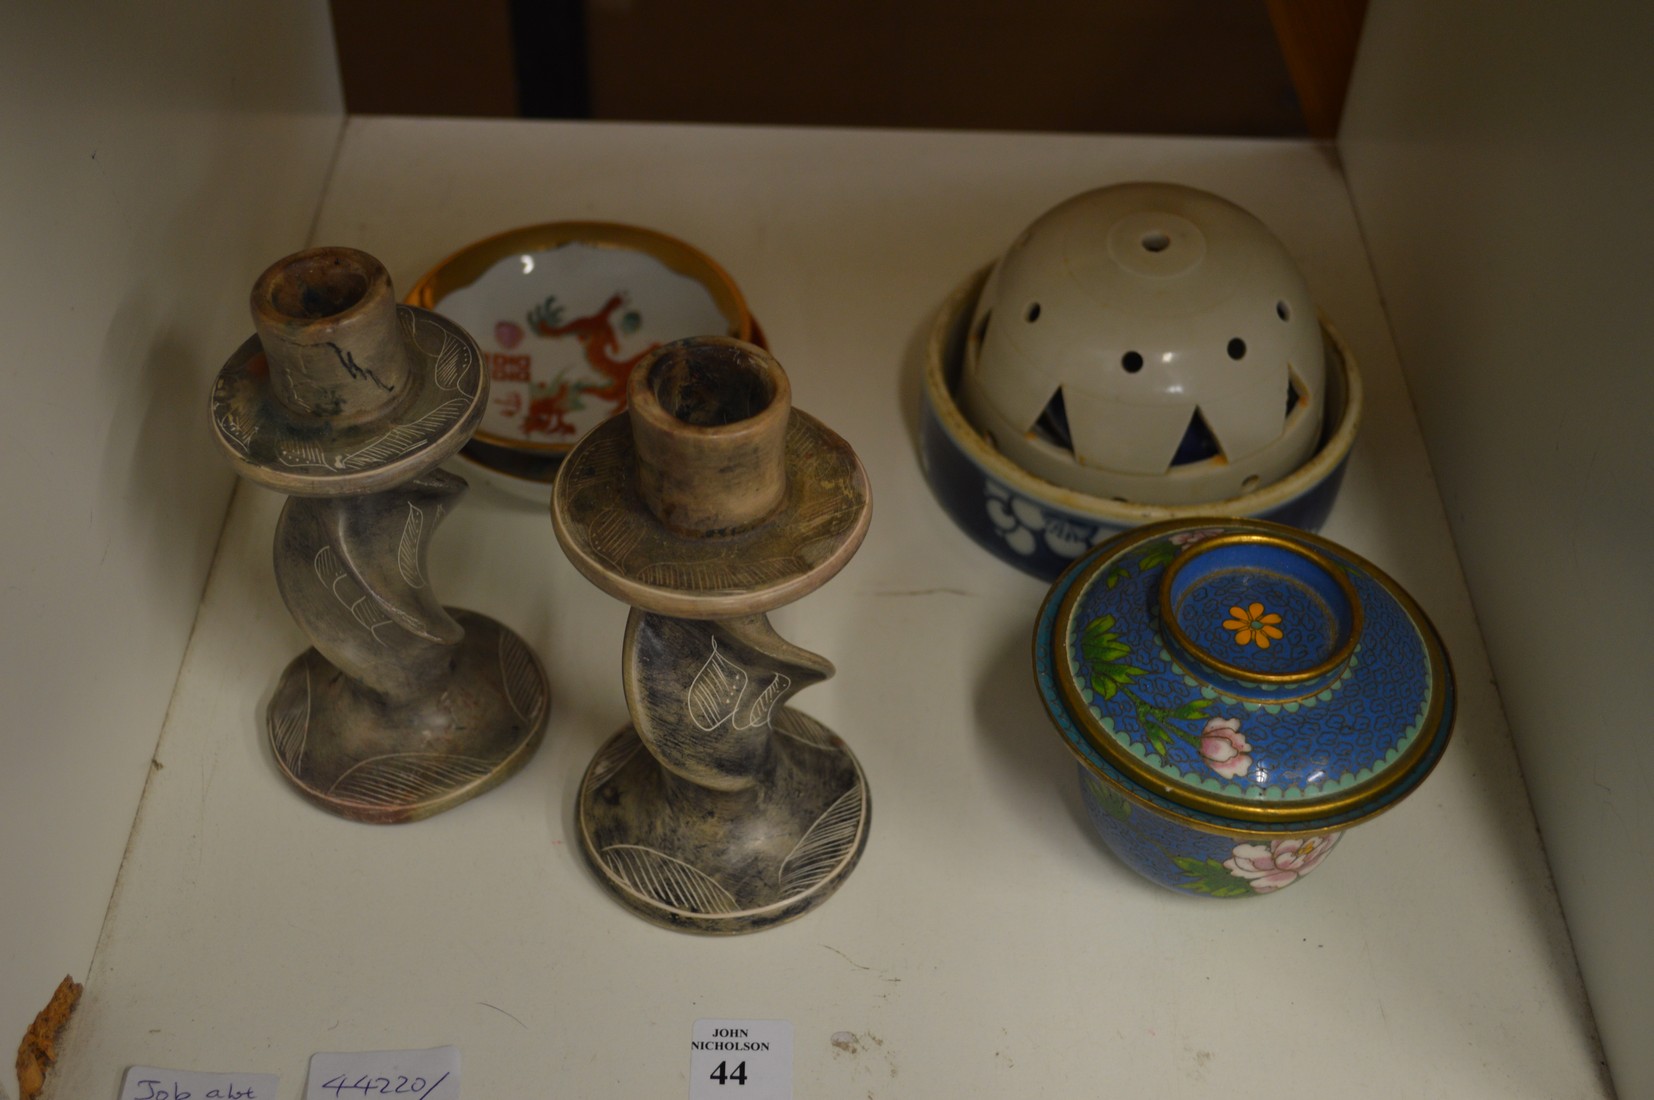 A cloisonne bowel and cover and other items.